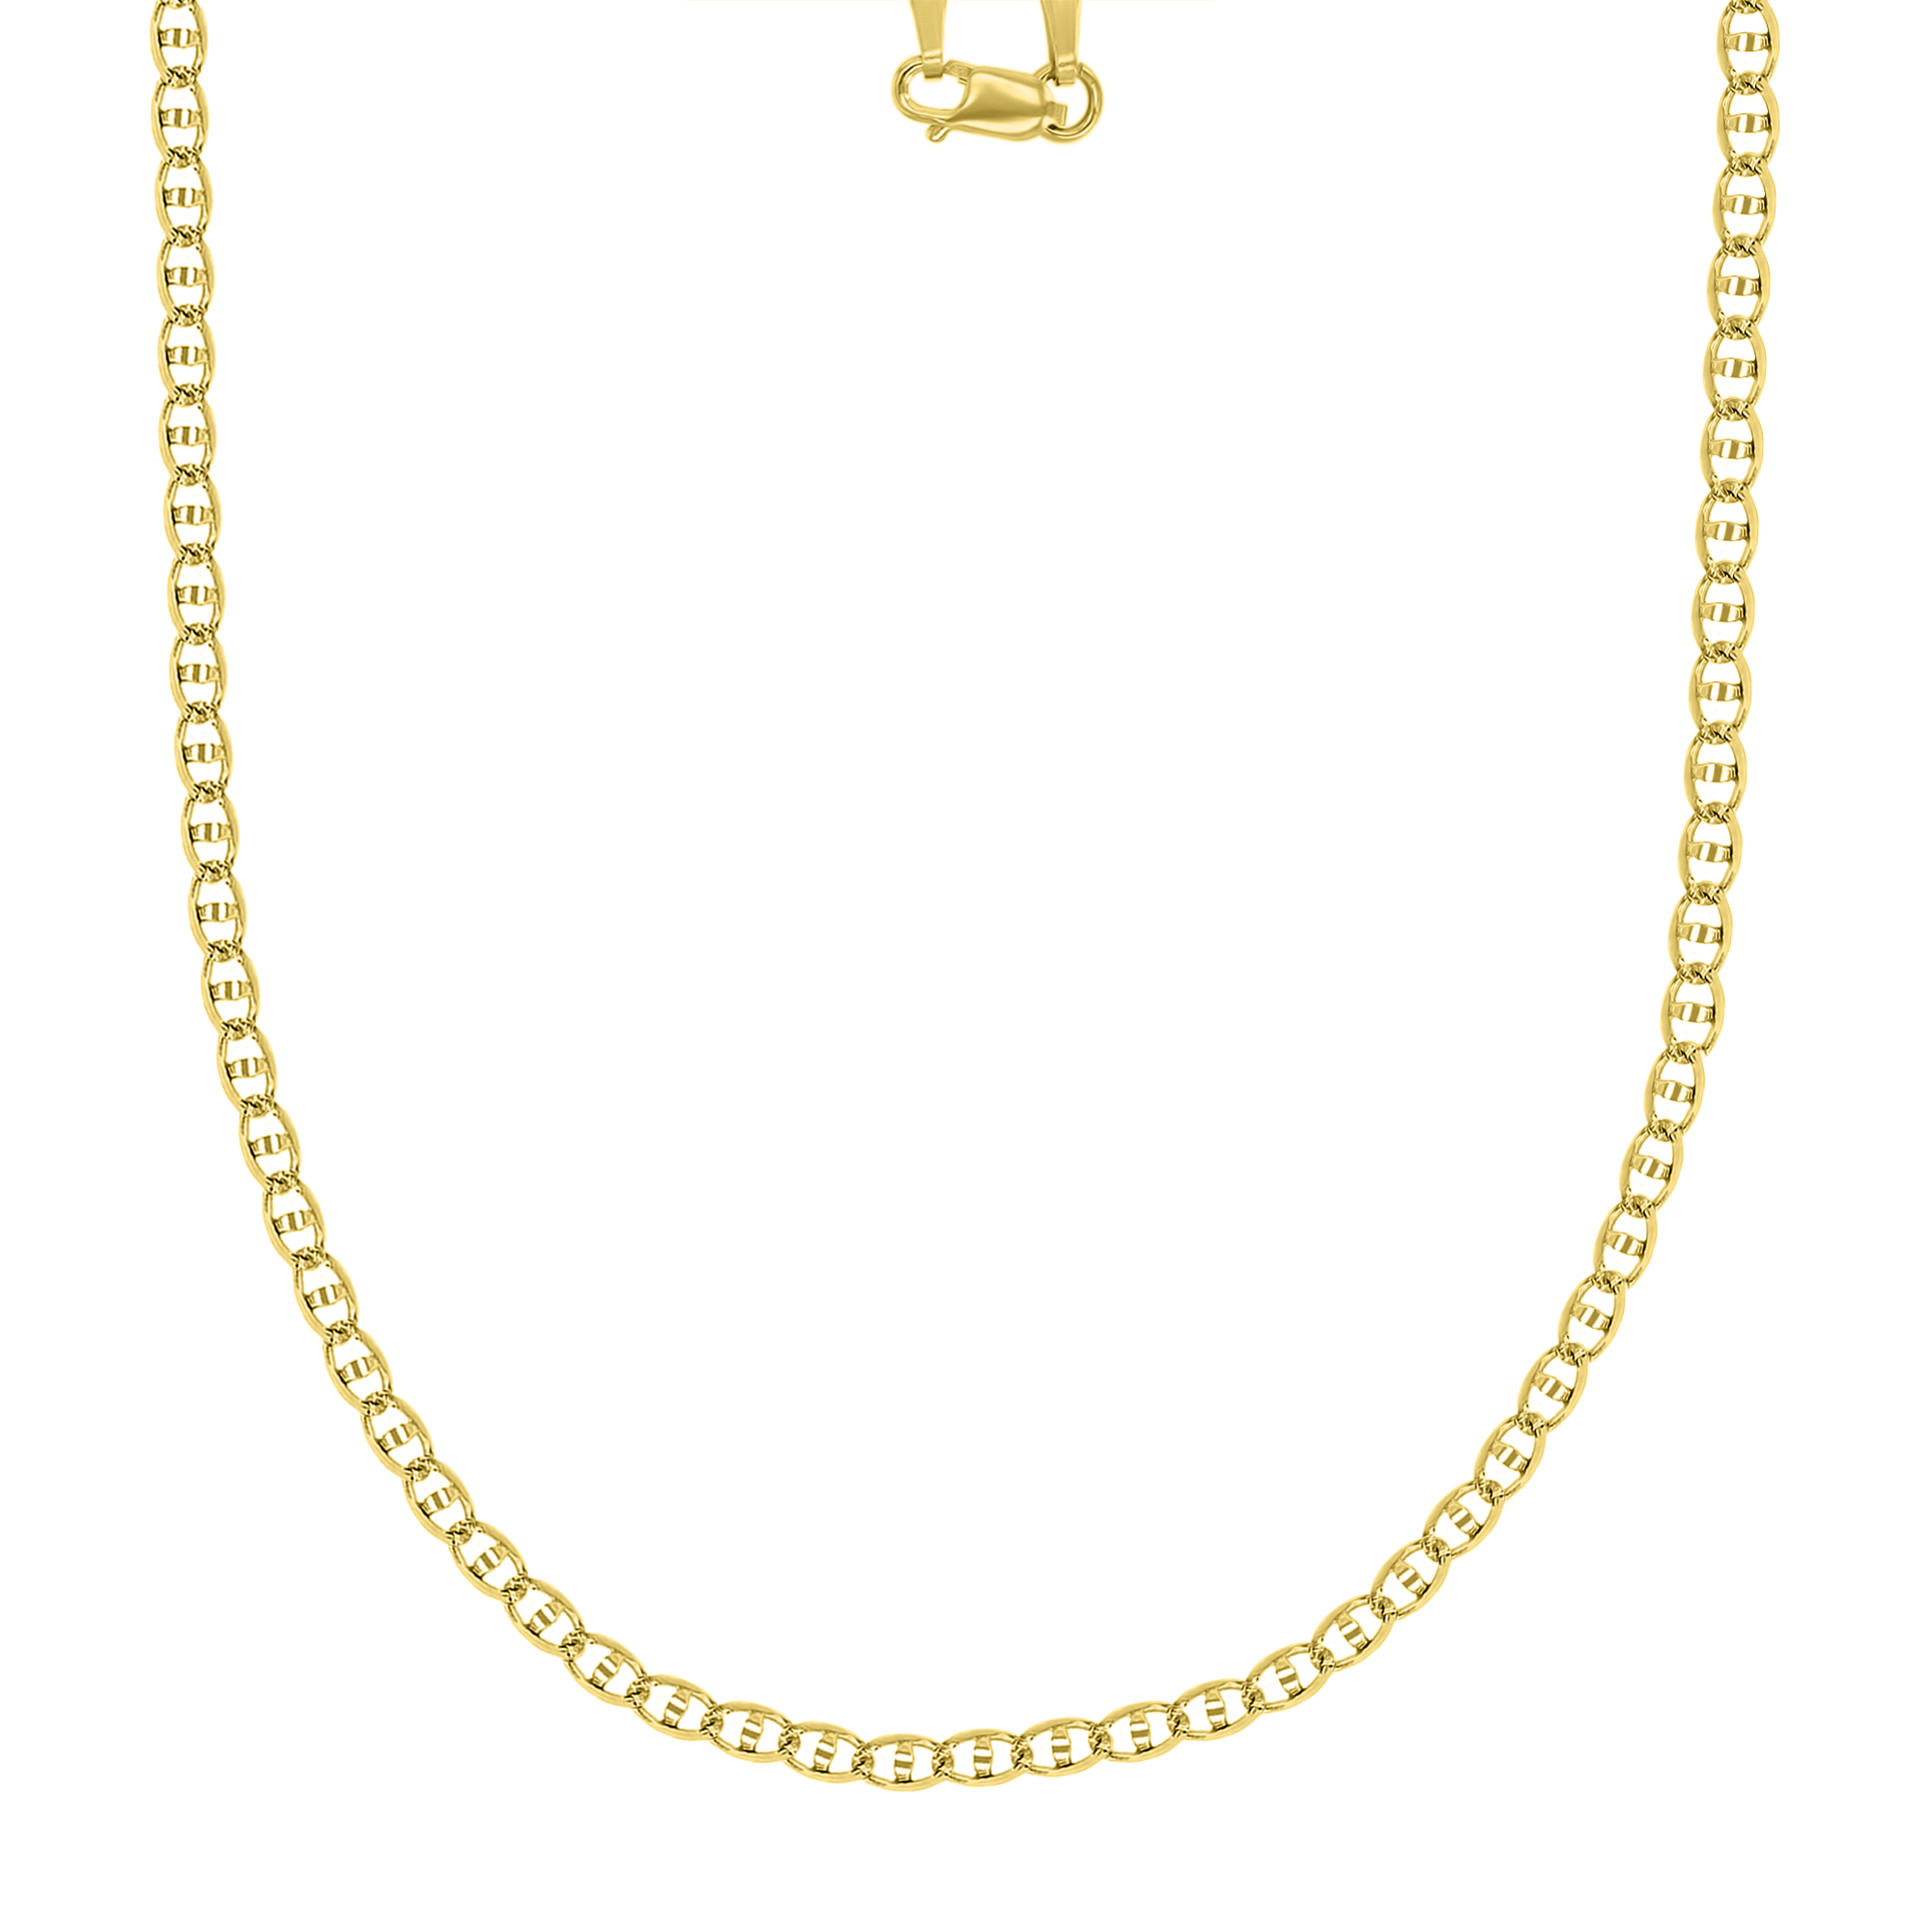 14K Yellow Gold 3mm 20" 060 Pave Mariner Link Chain